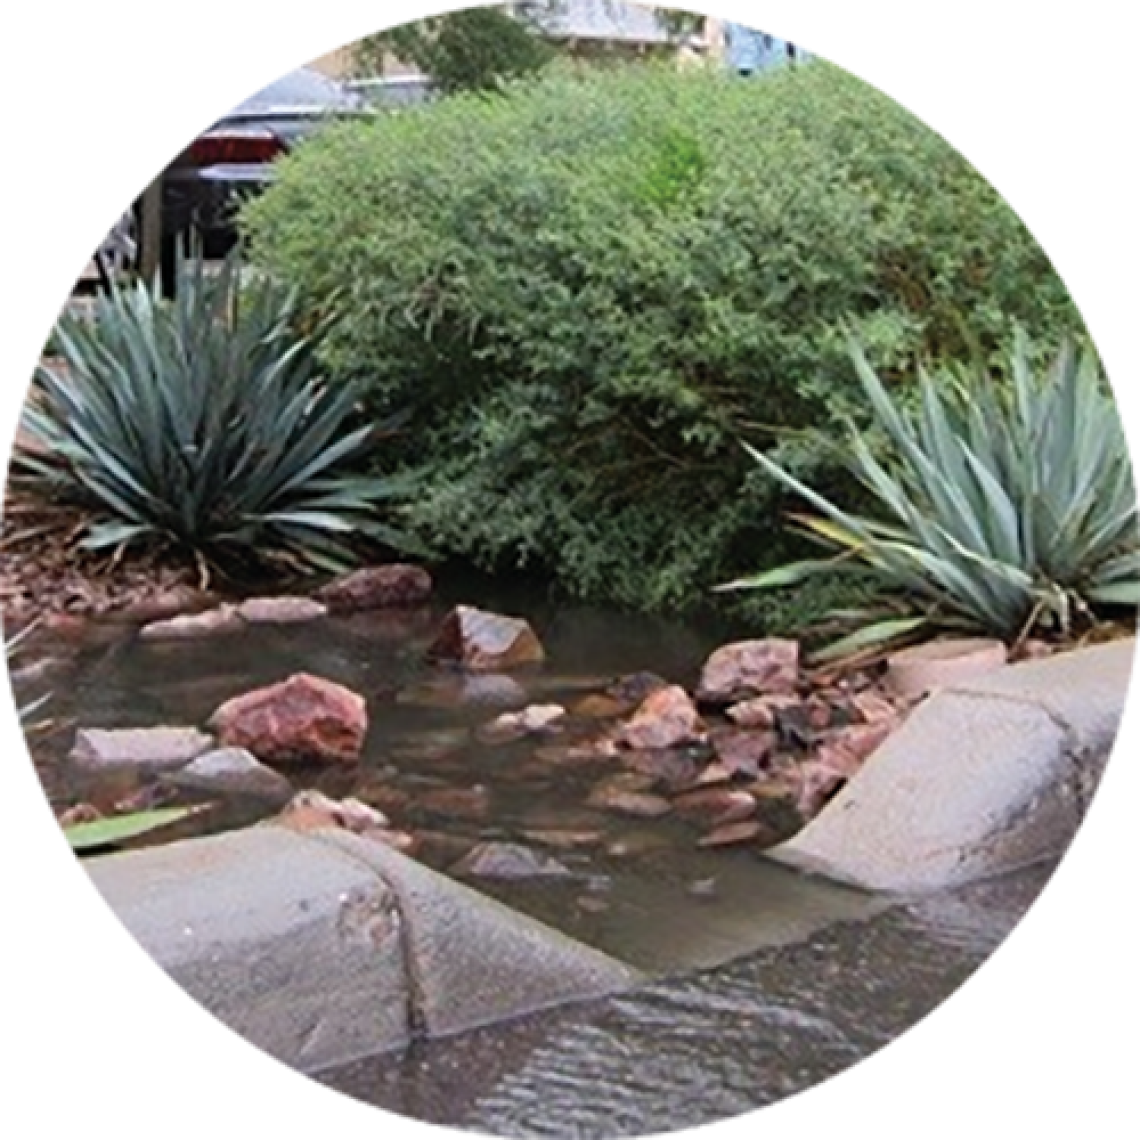 City of Tucson Climate Action and Adaptation Plan